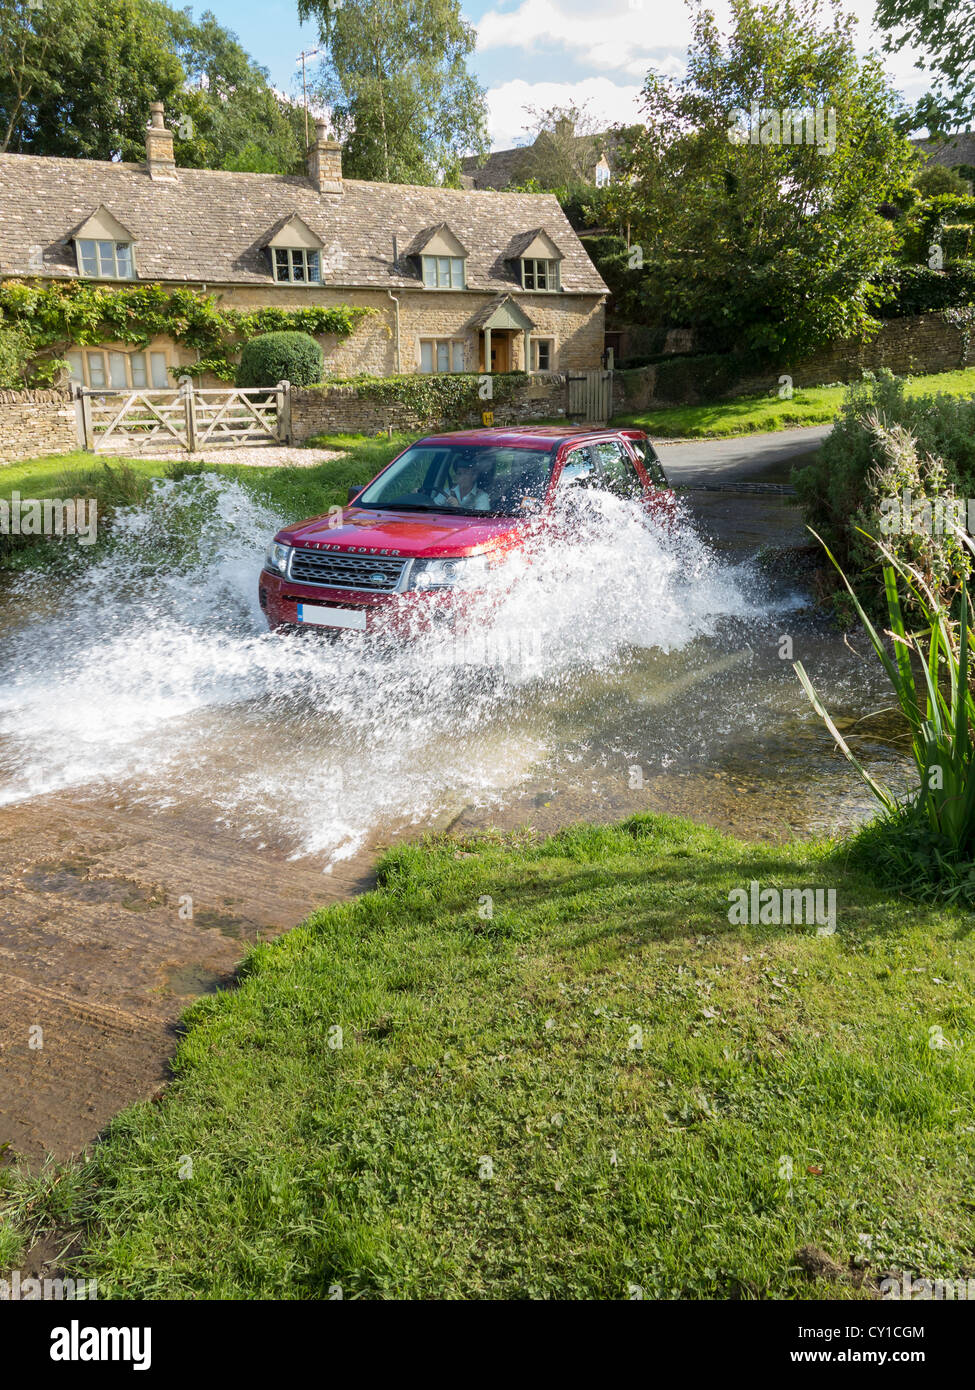 Land rover Freelander crossing a stream, Cotswolds, England Stock Photo